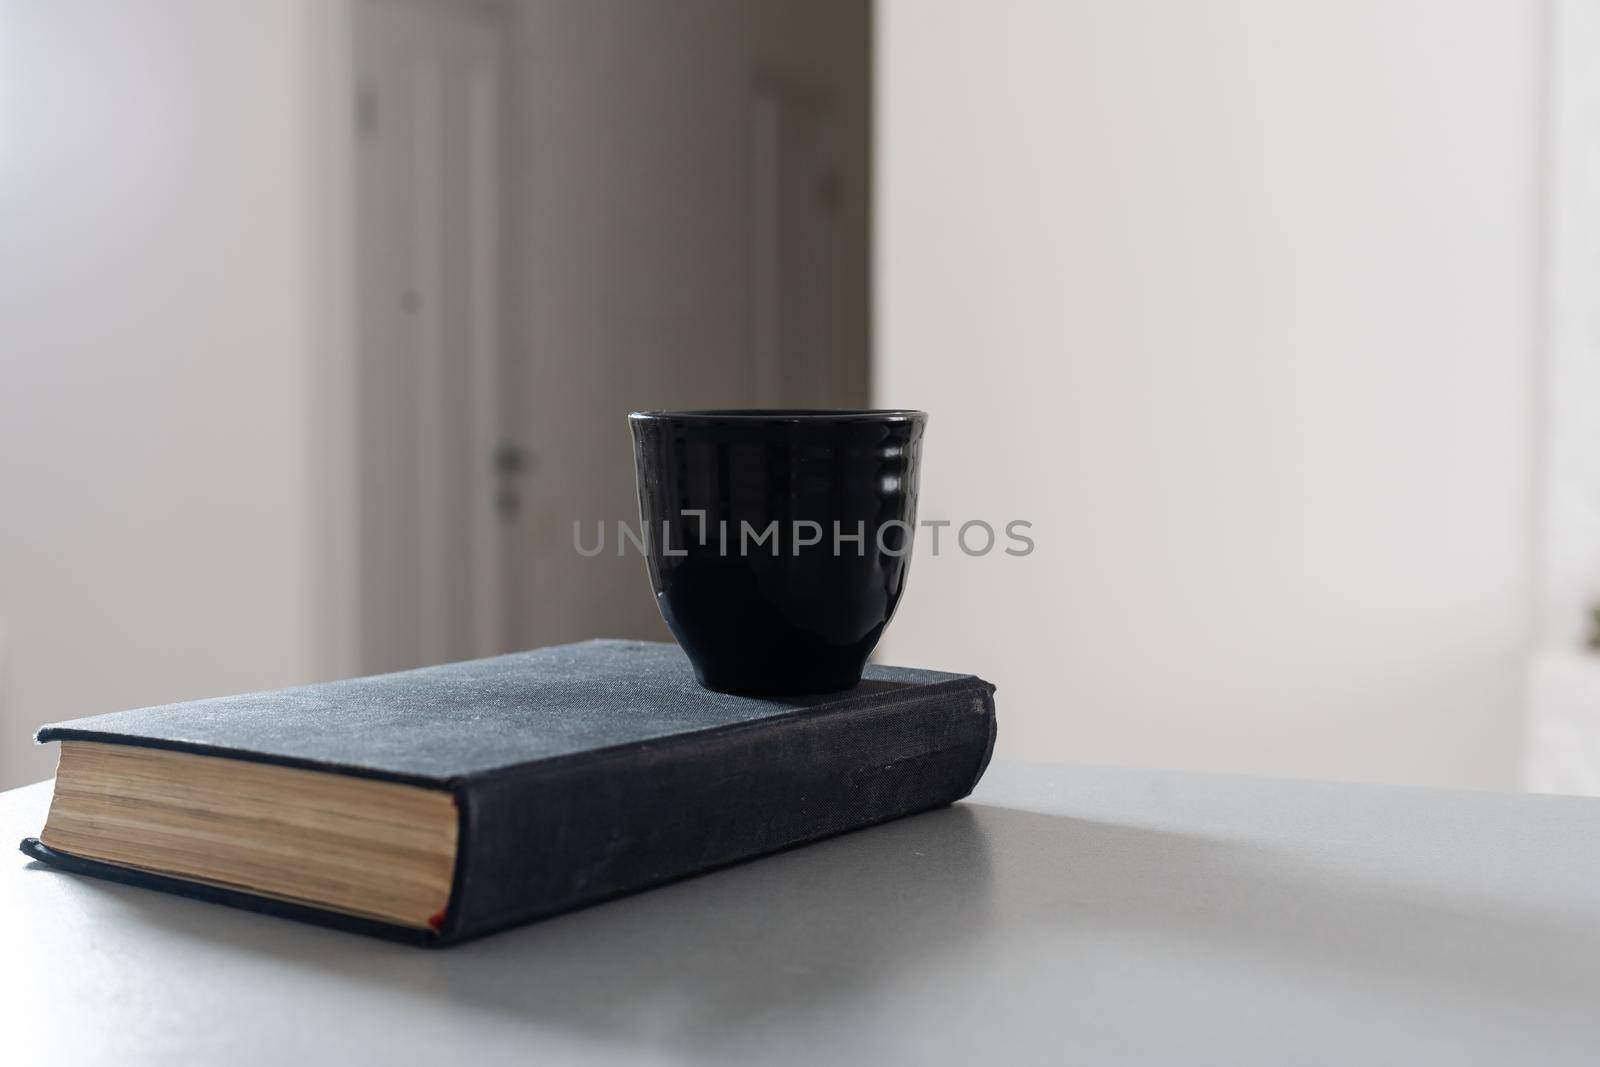 Personal Bible Study with a Cup of Coffee.